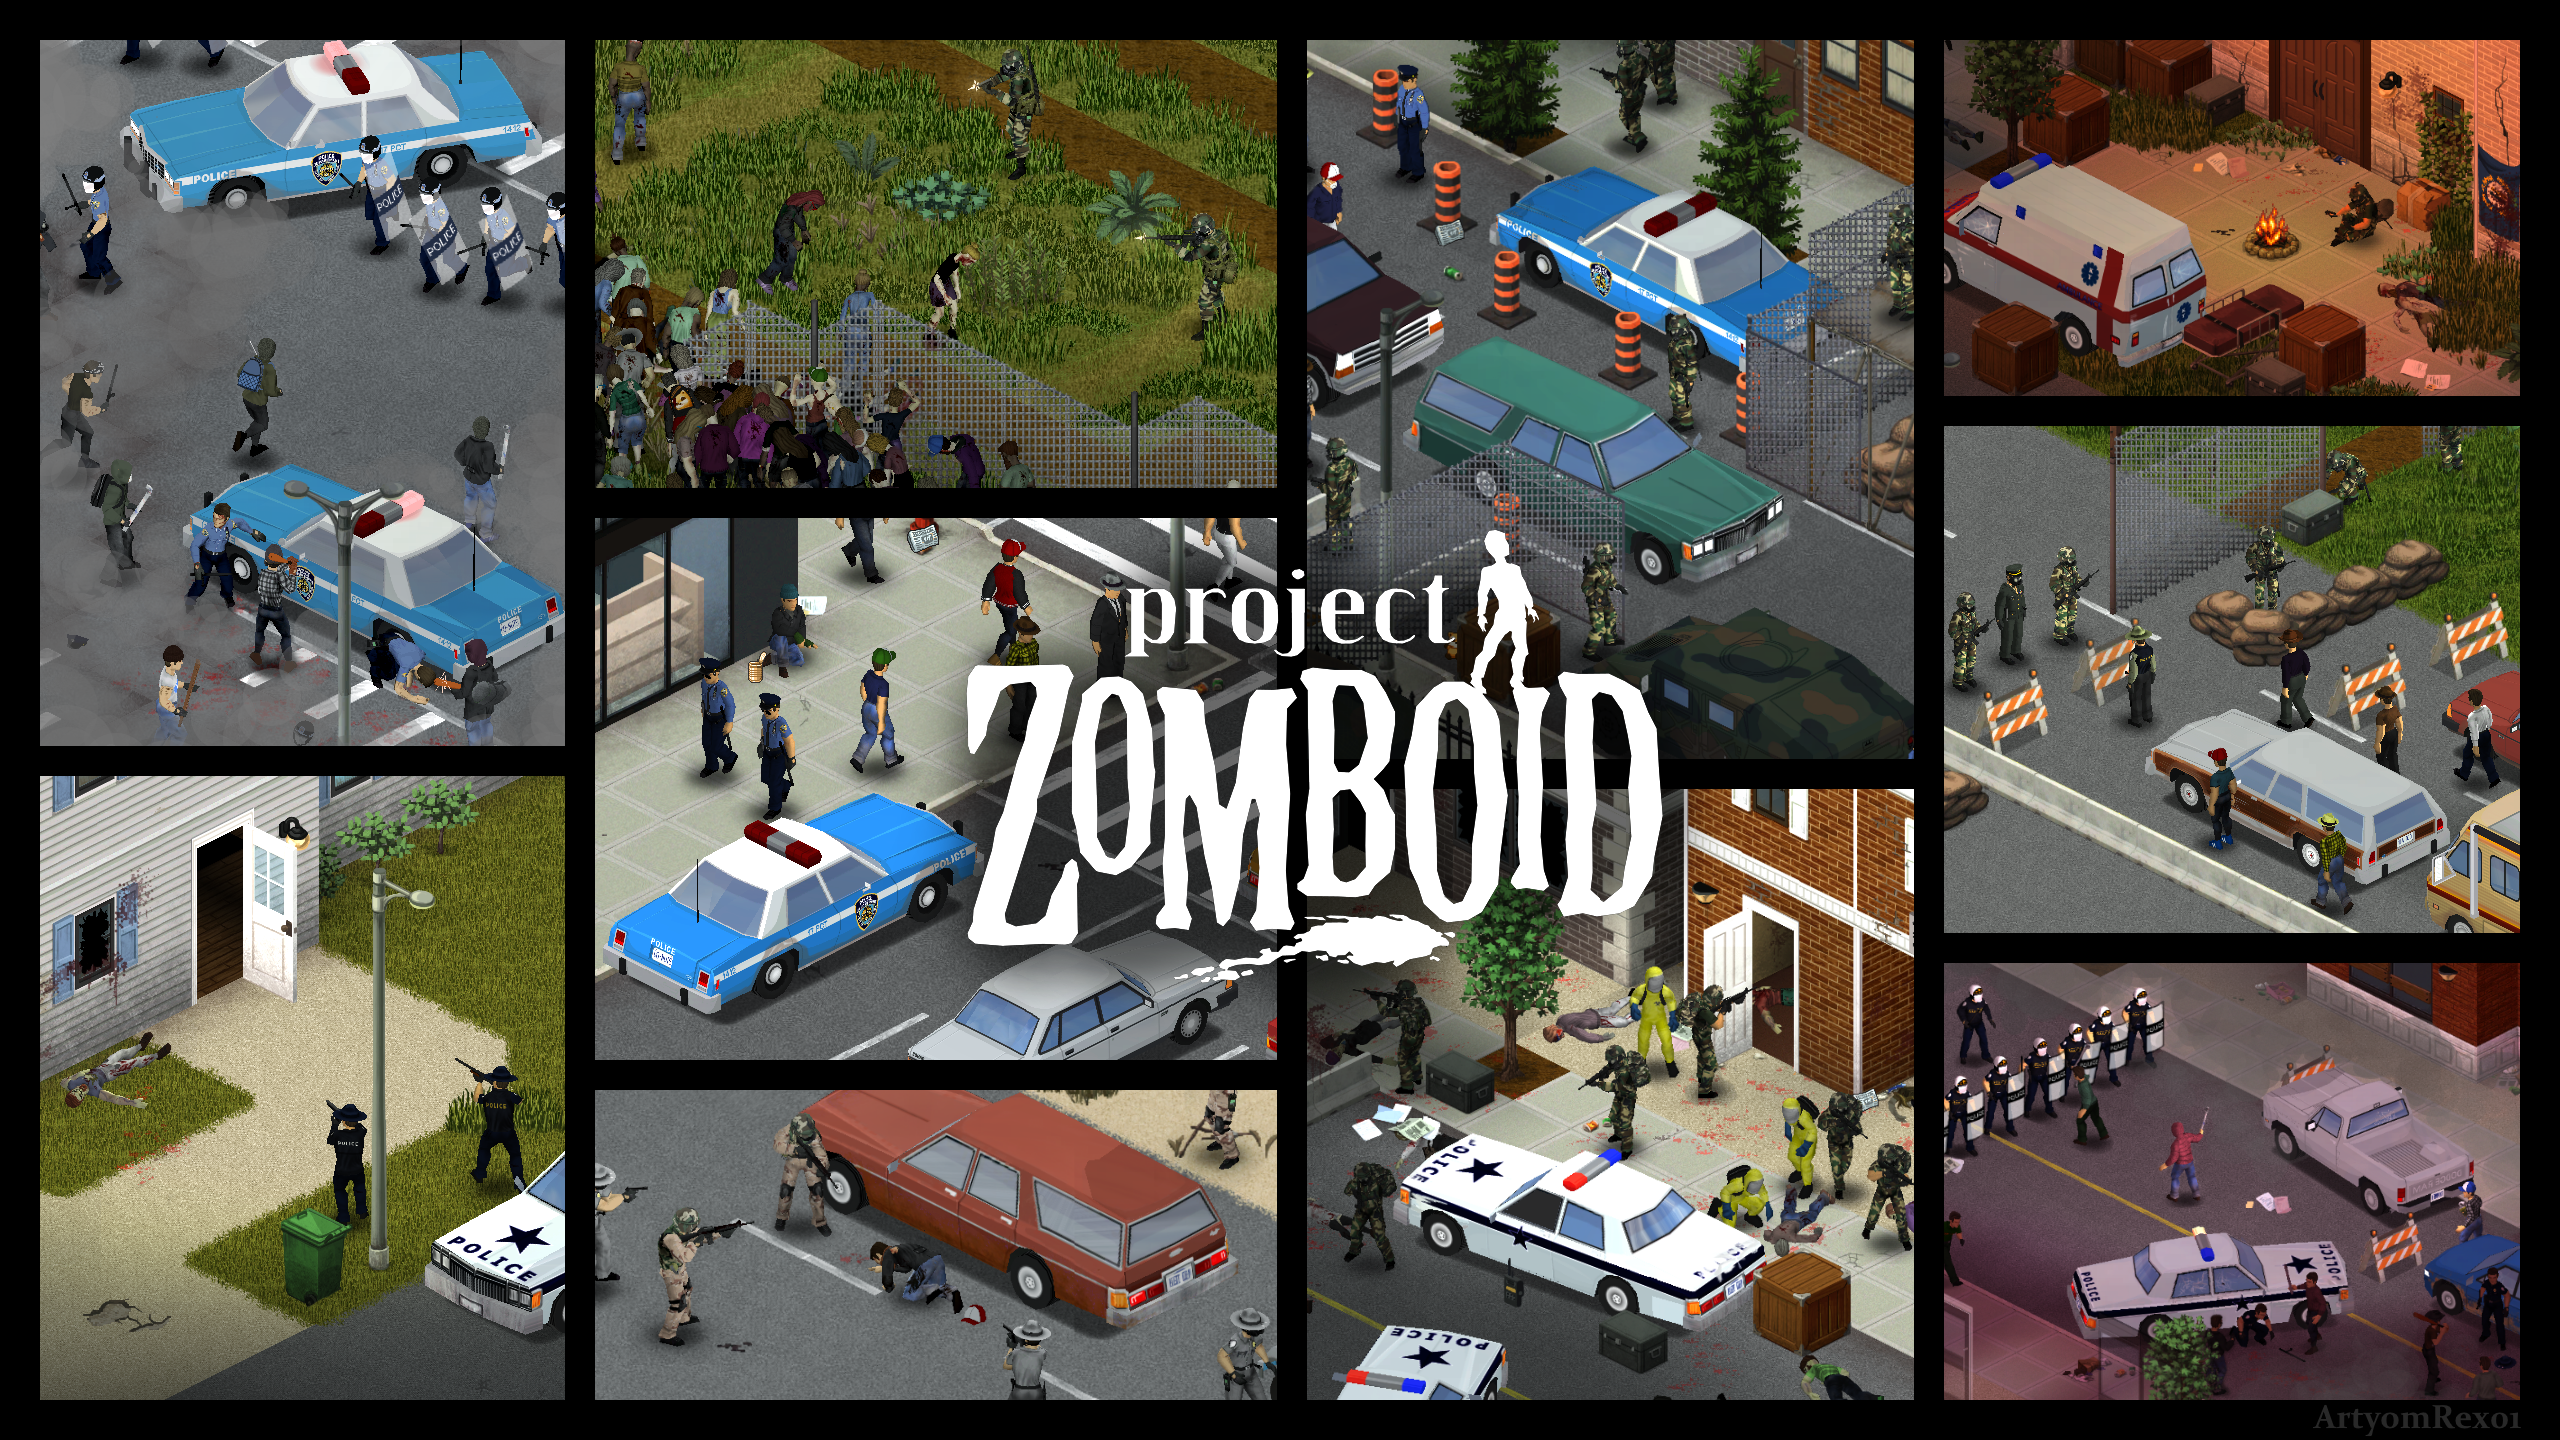 Project zomboid wallpaper 2560x1440 and 3840x2160